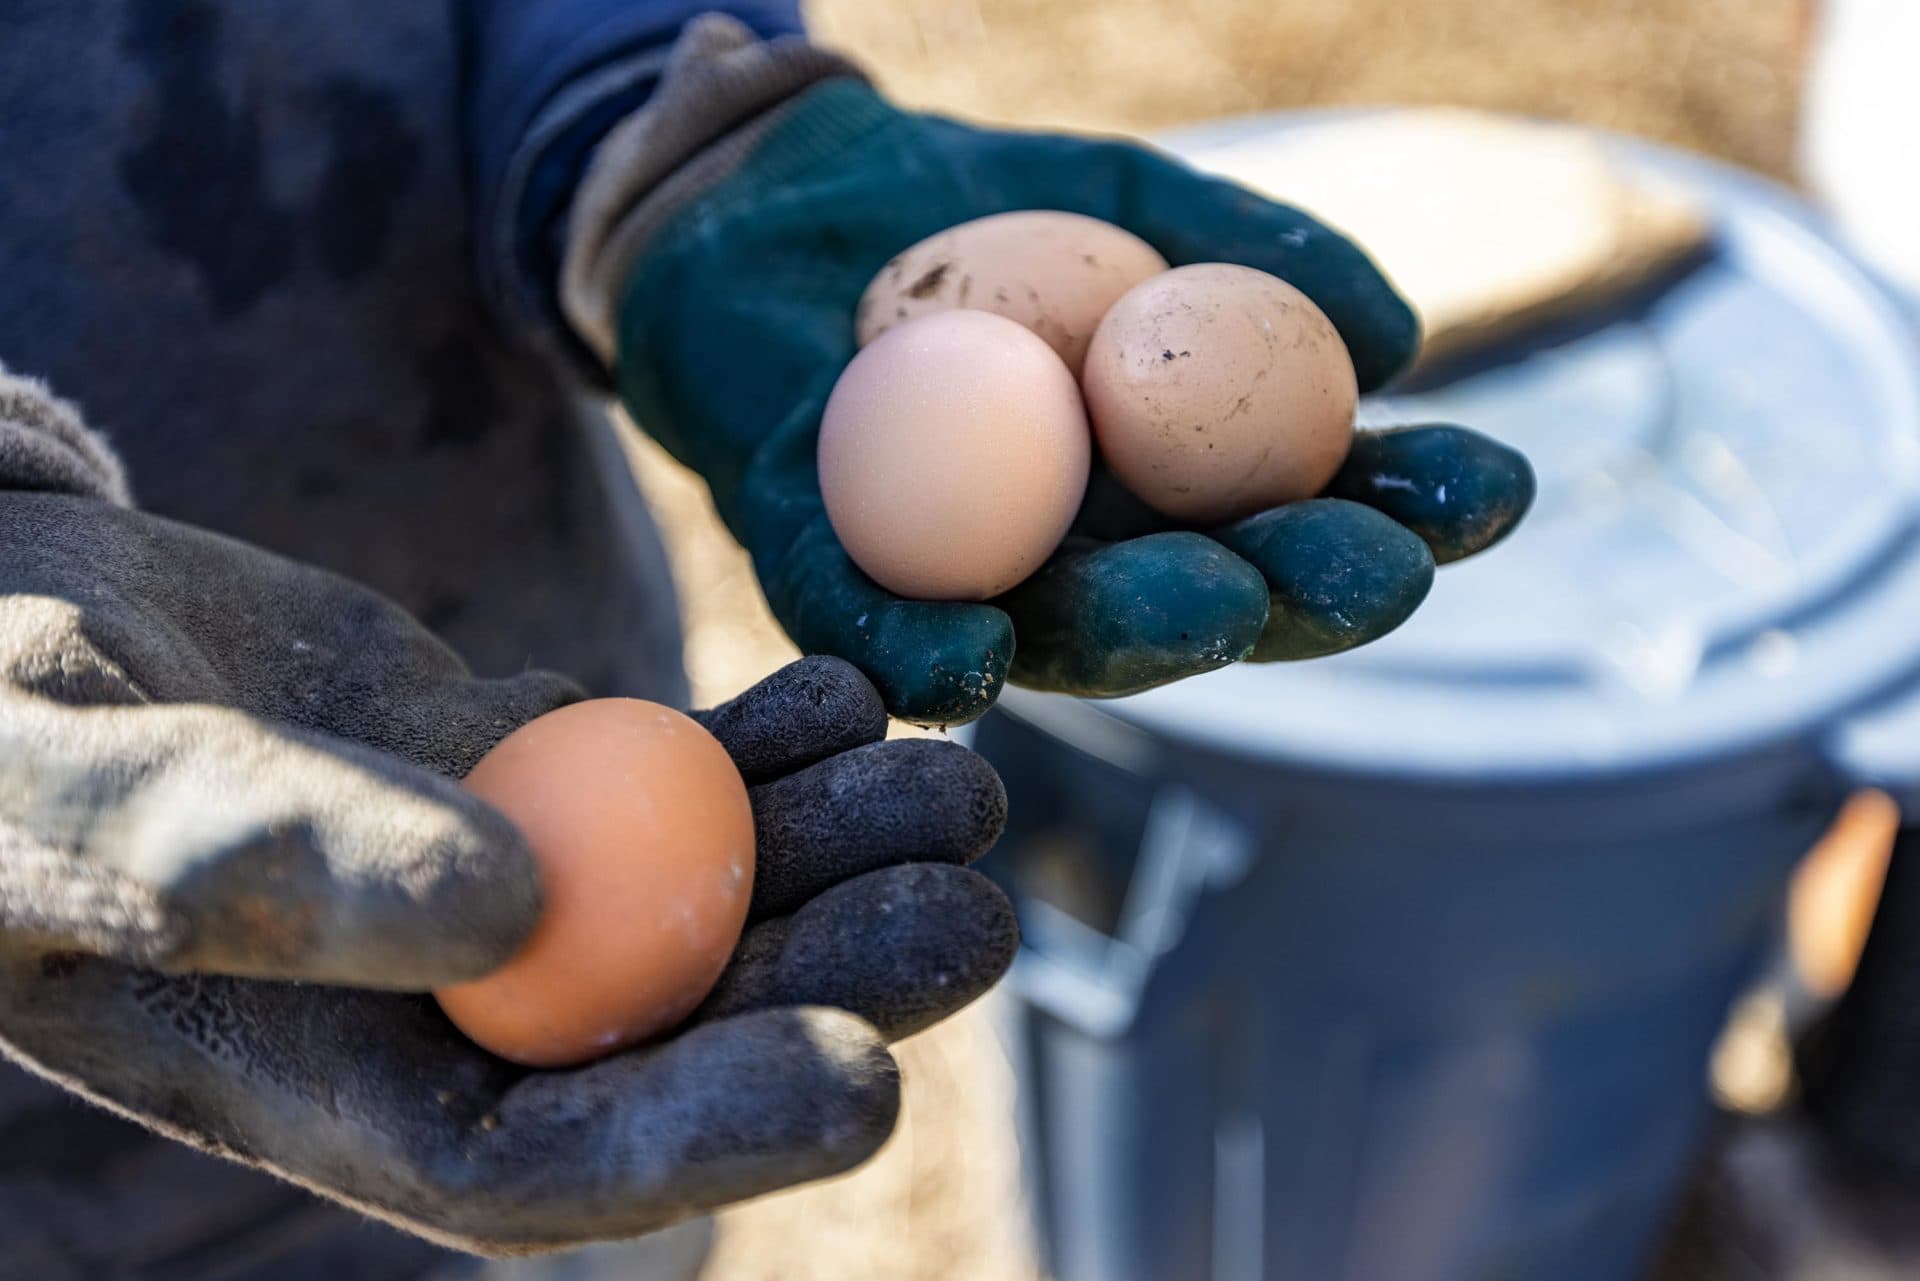 Farmer Josh Louro holds eggs he has just collected from the chicken coop at Round the Bend Farm. (Jesse Costa/WBUR)